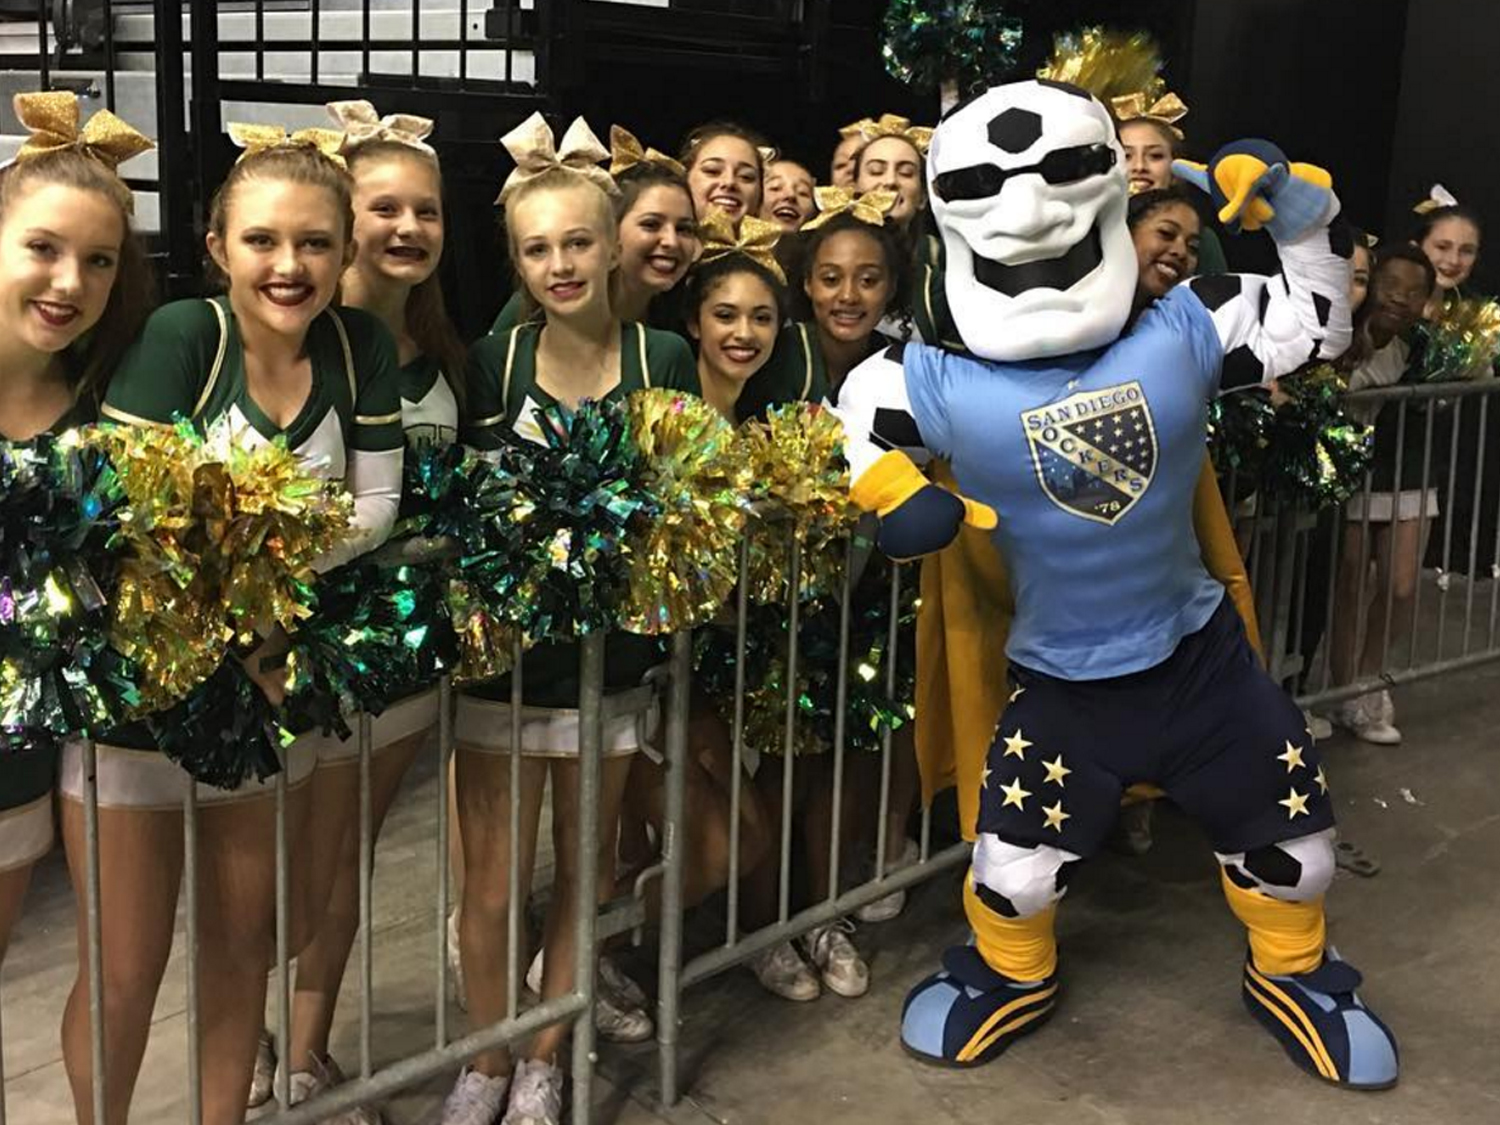 hockey mascot with fans